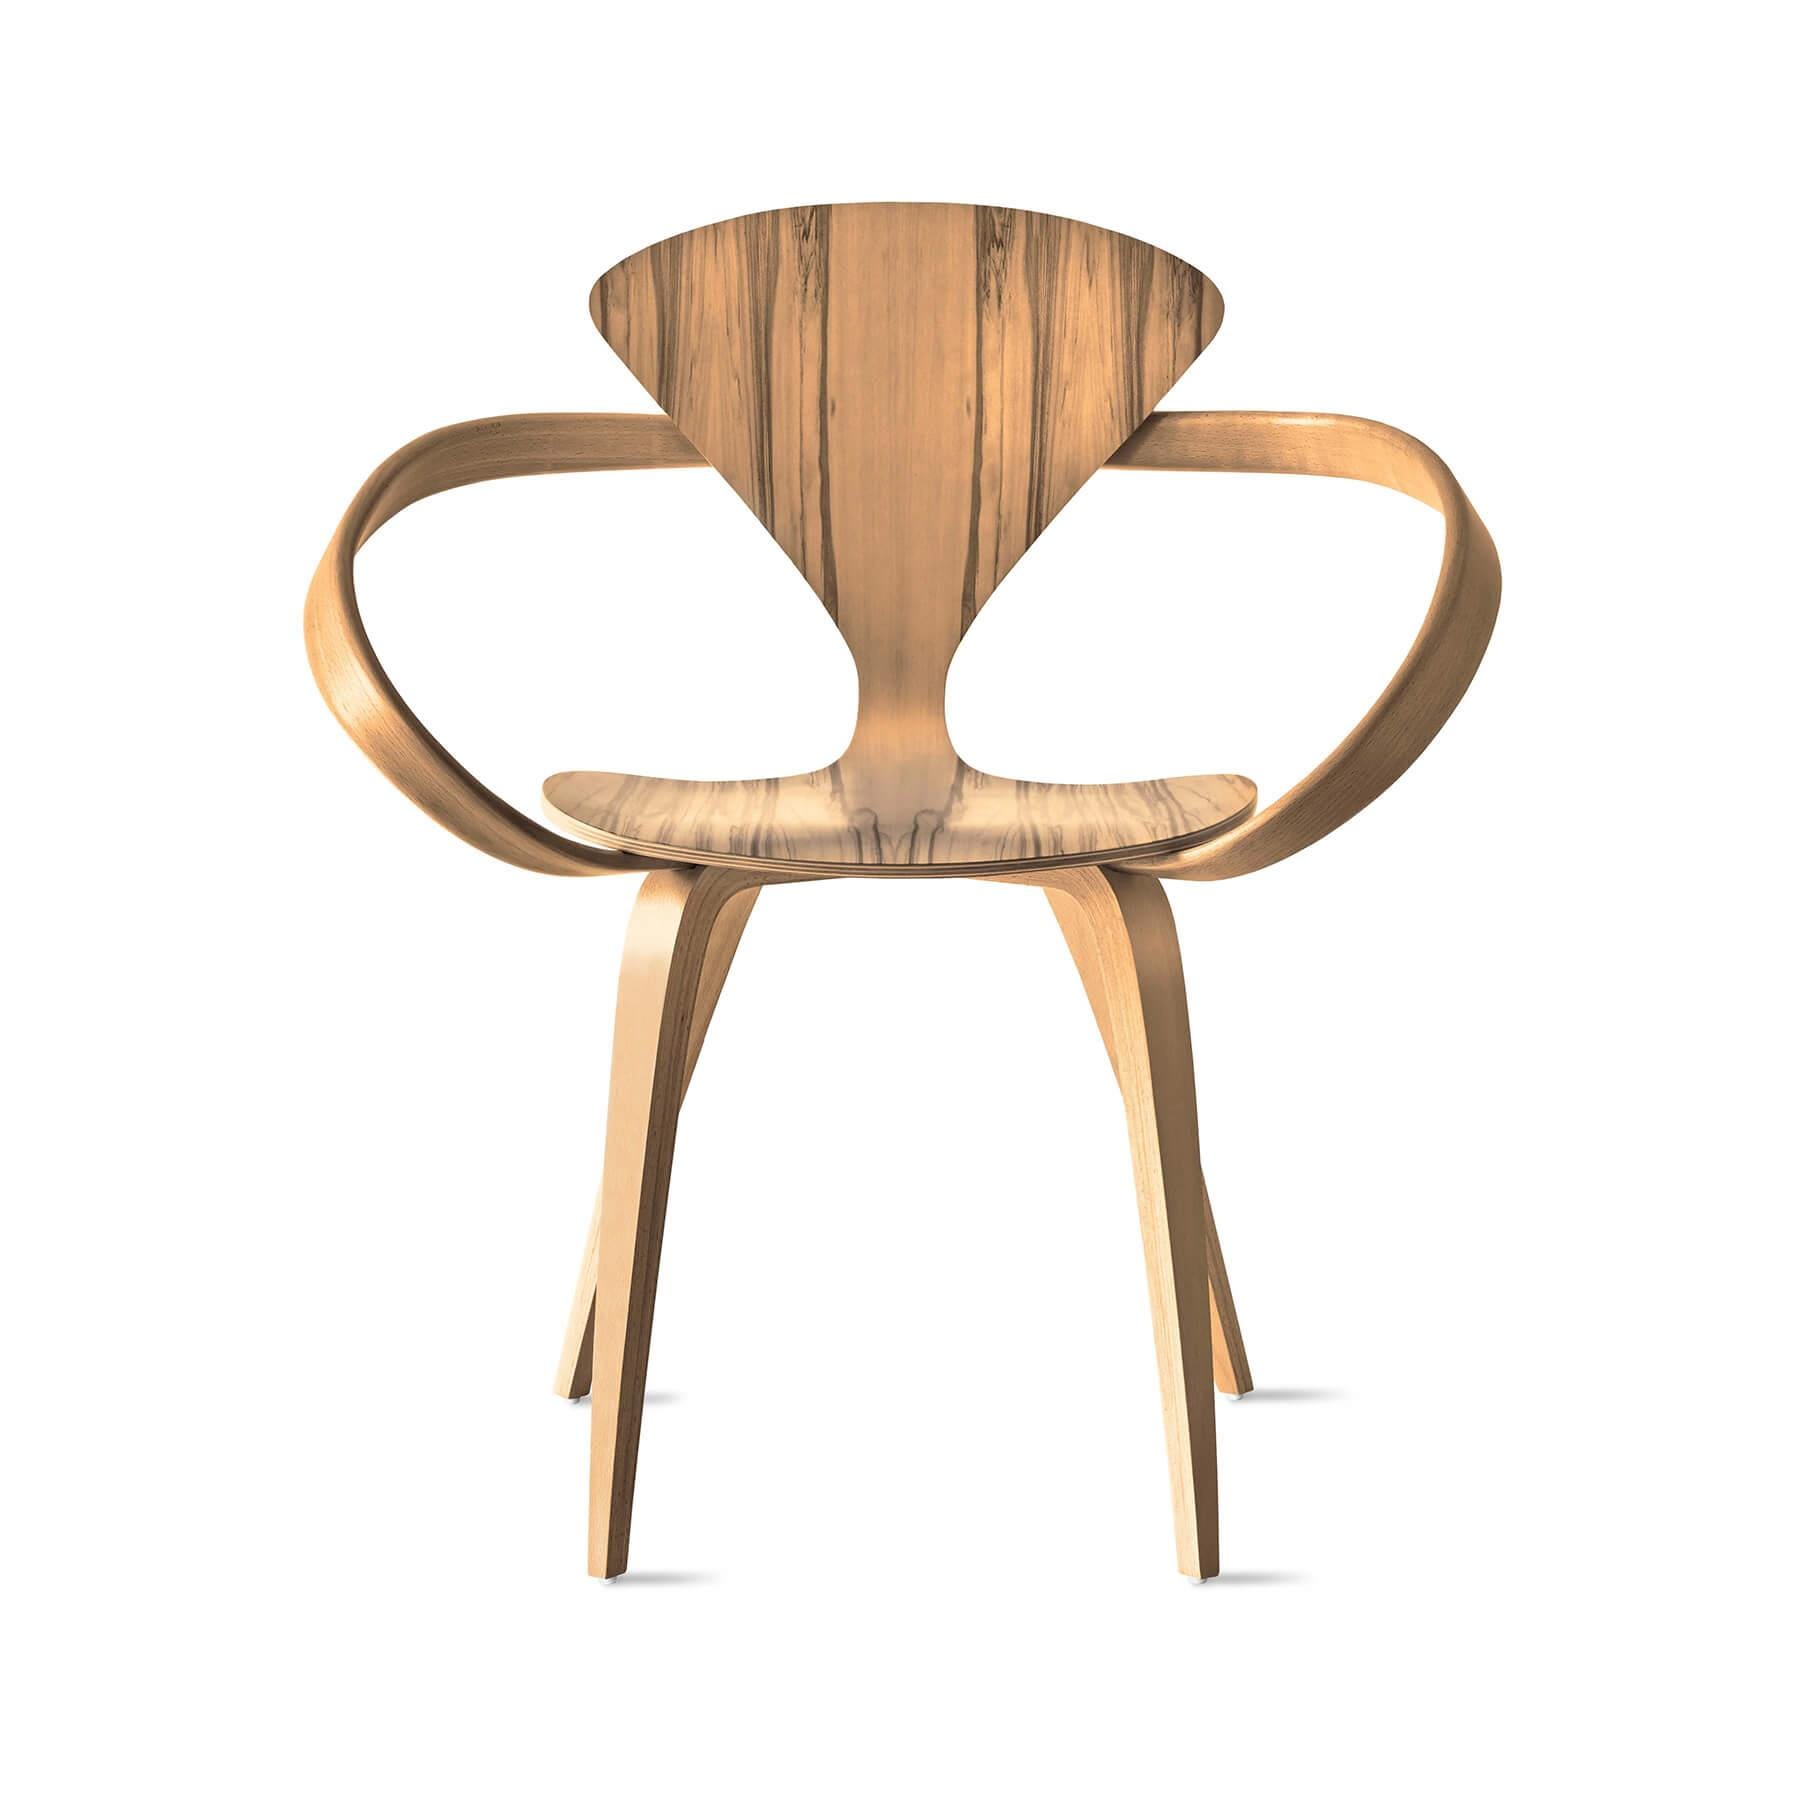 Cherner Armchair Unupholstered Red Gum Light Wood Designer Furniture From Holloways Of Ludlow